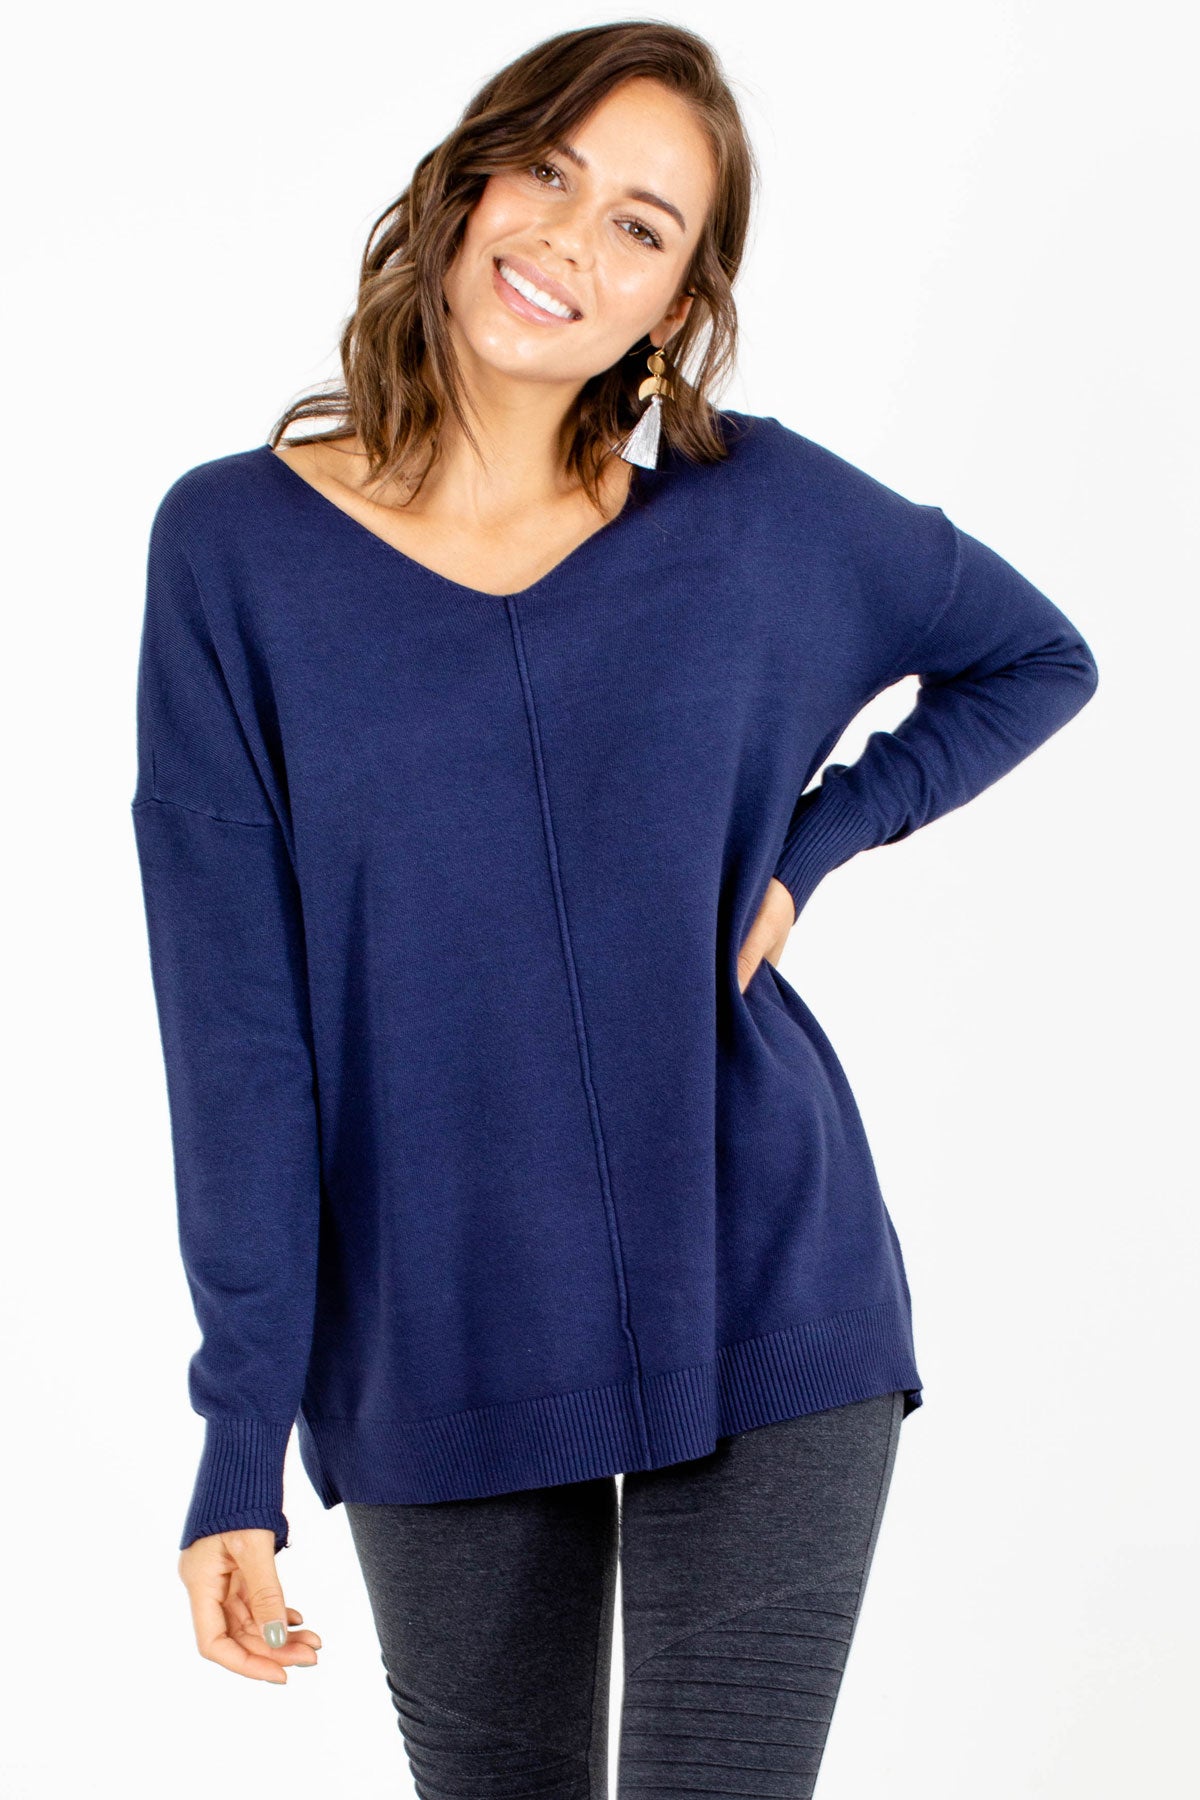 Navy Blue Cozy and Warm Boutique Sweaters for Women